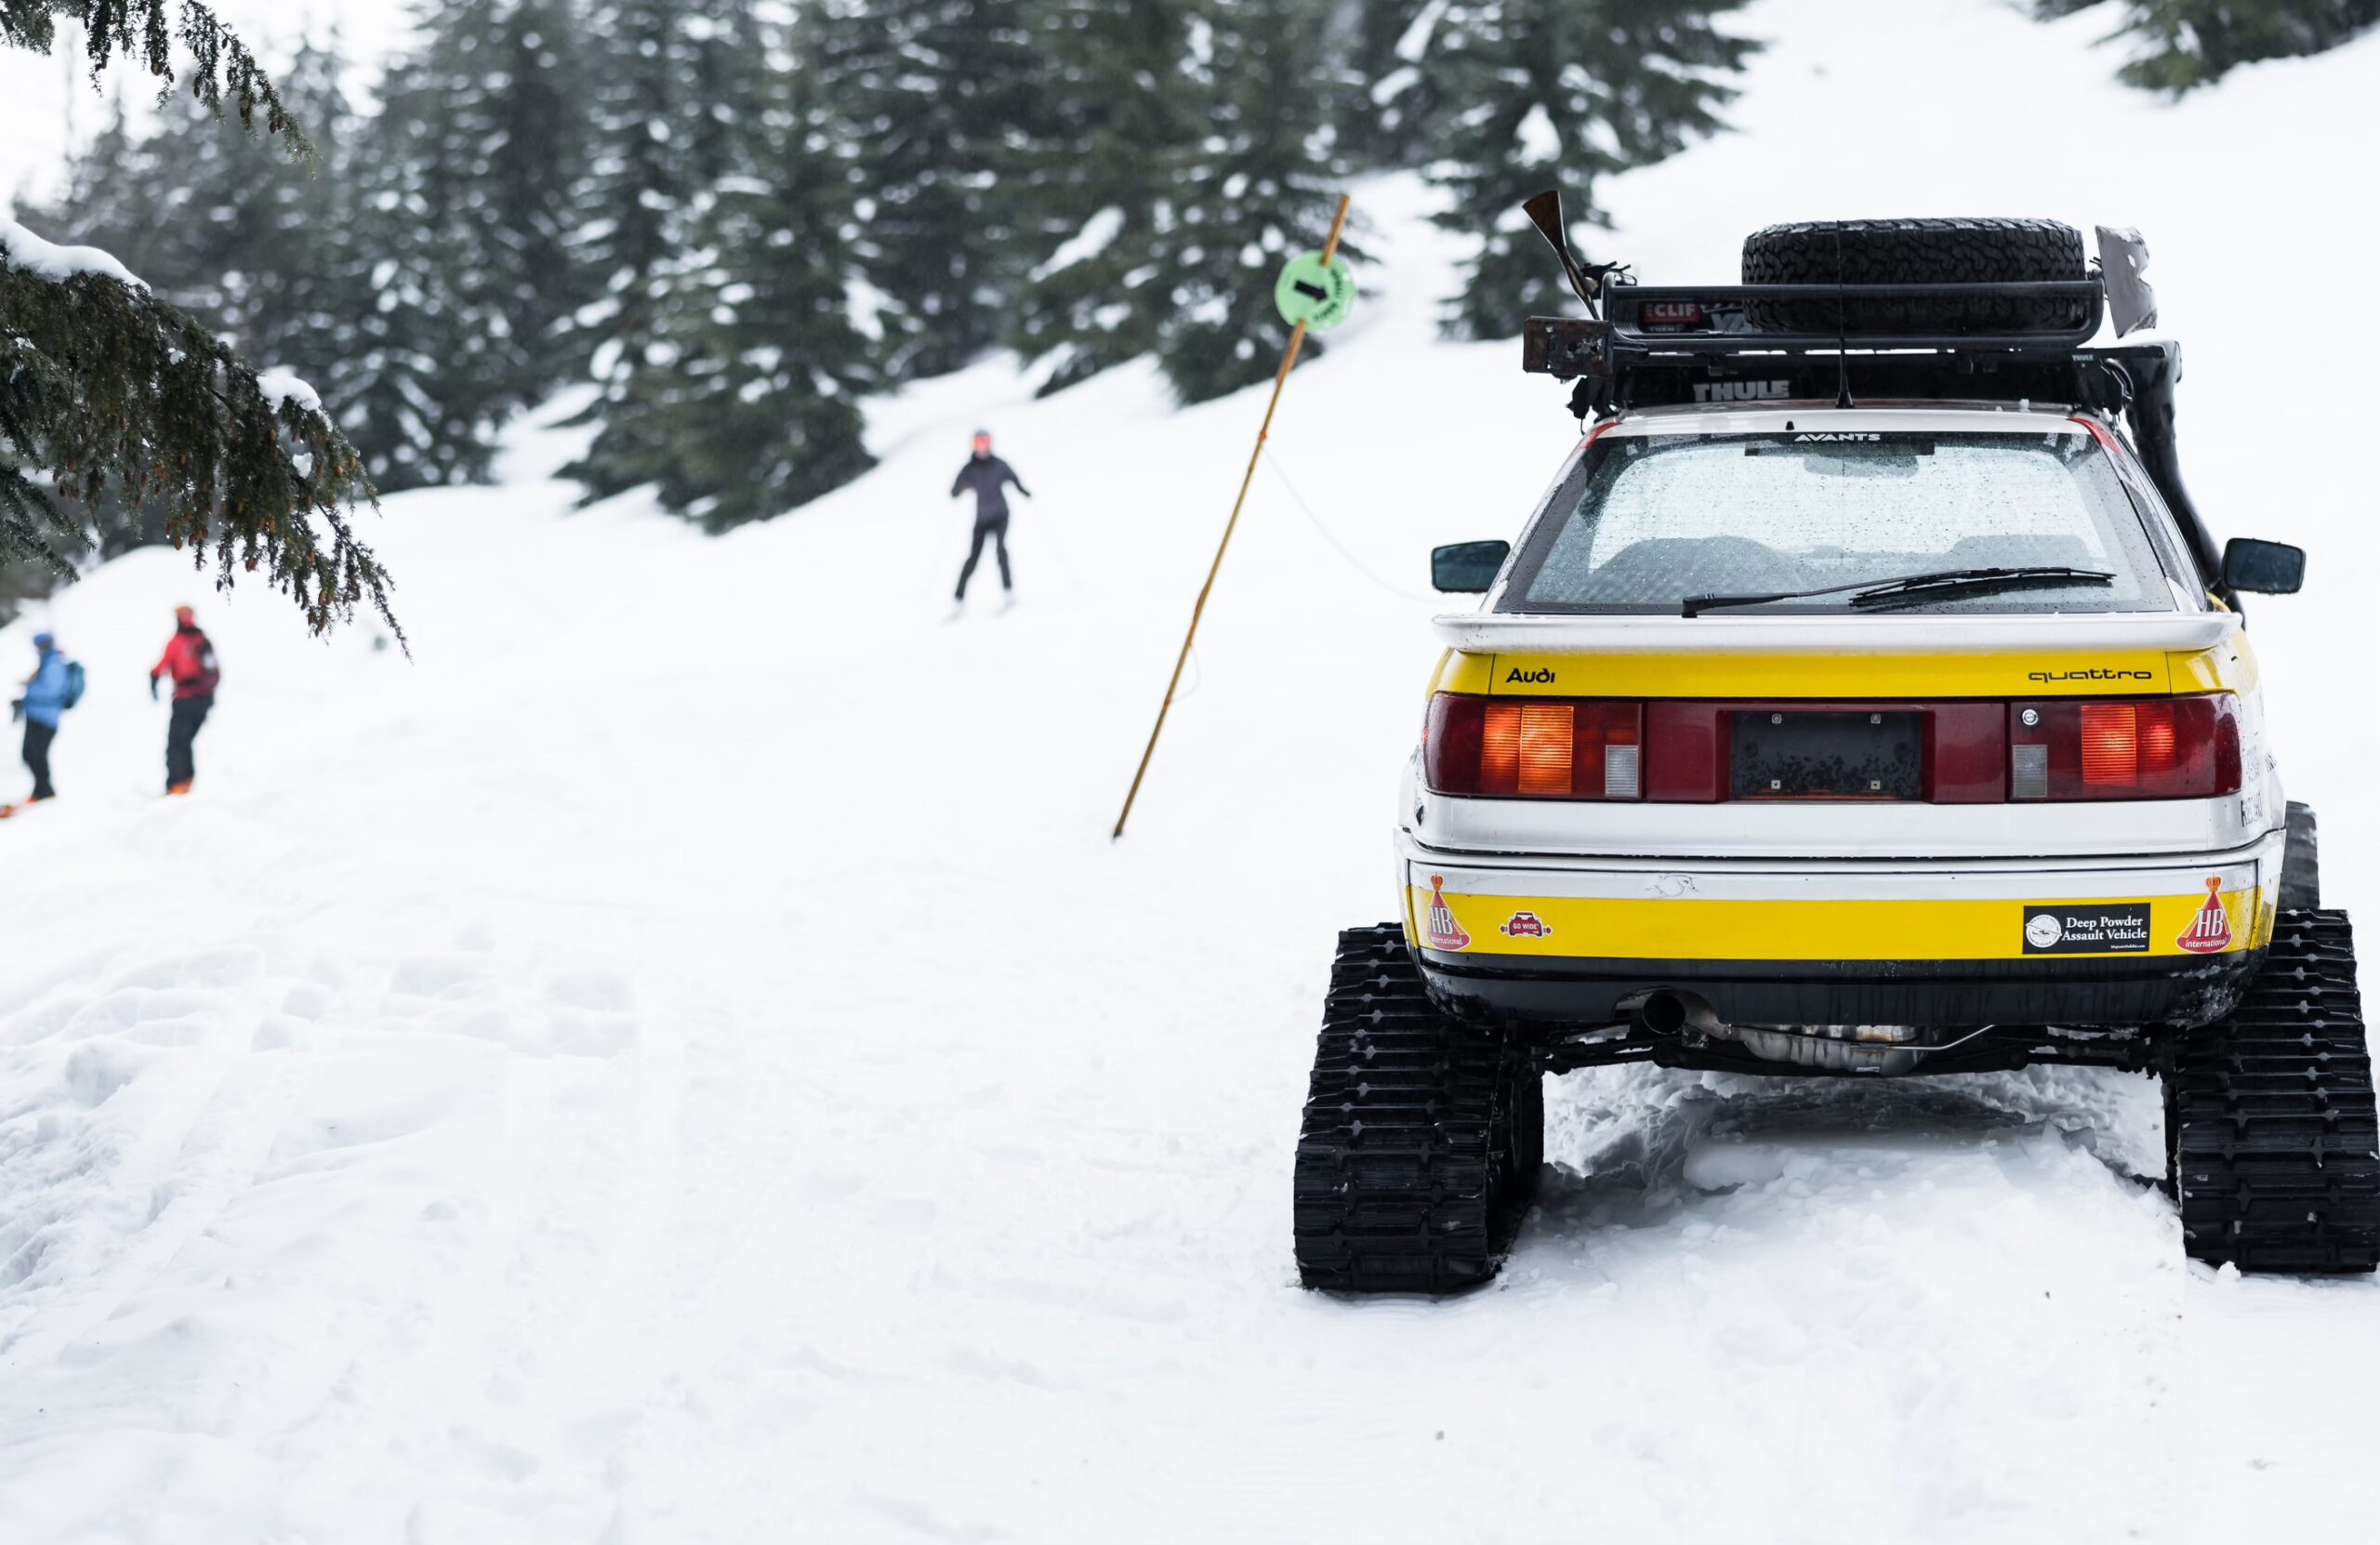 This 1990 Audi Quattro on Tracks Was Made For the Mountains, Just Not Ski Runs